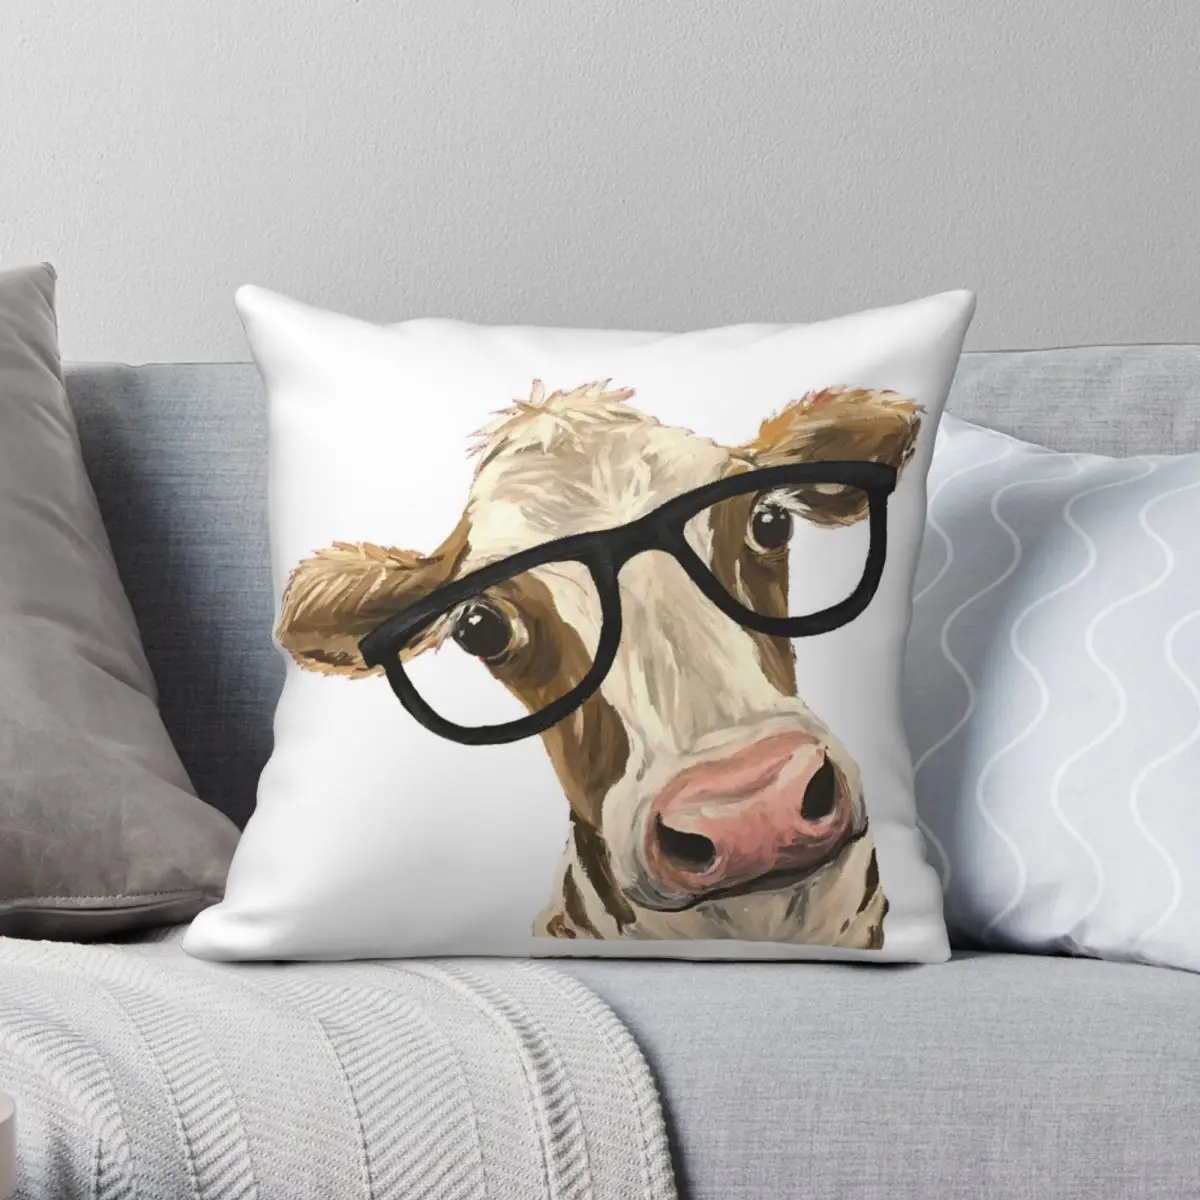 Cow Art With Glasses Square Pillowcase Polyester Linen Velvet Printed Zip Decor Pillow Case Home Cushion Cover